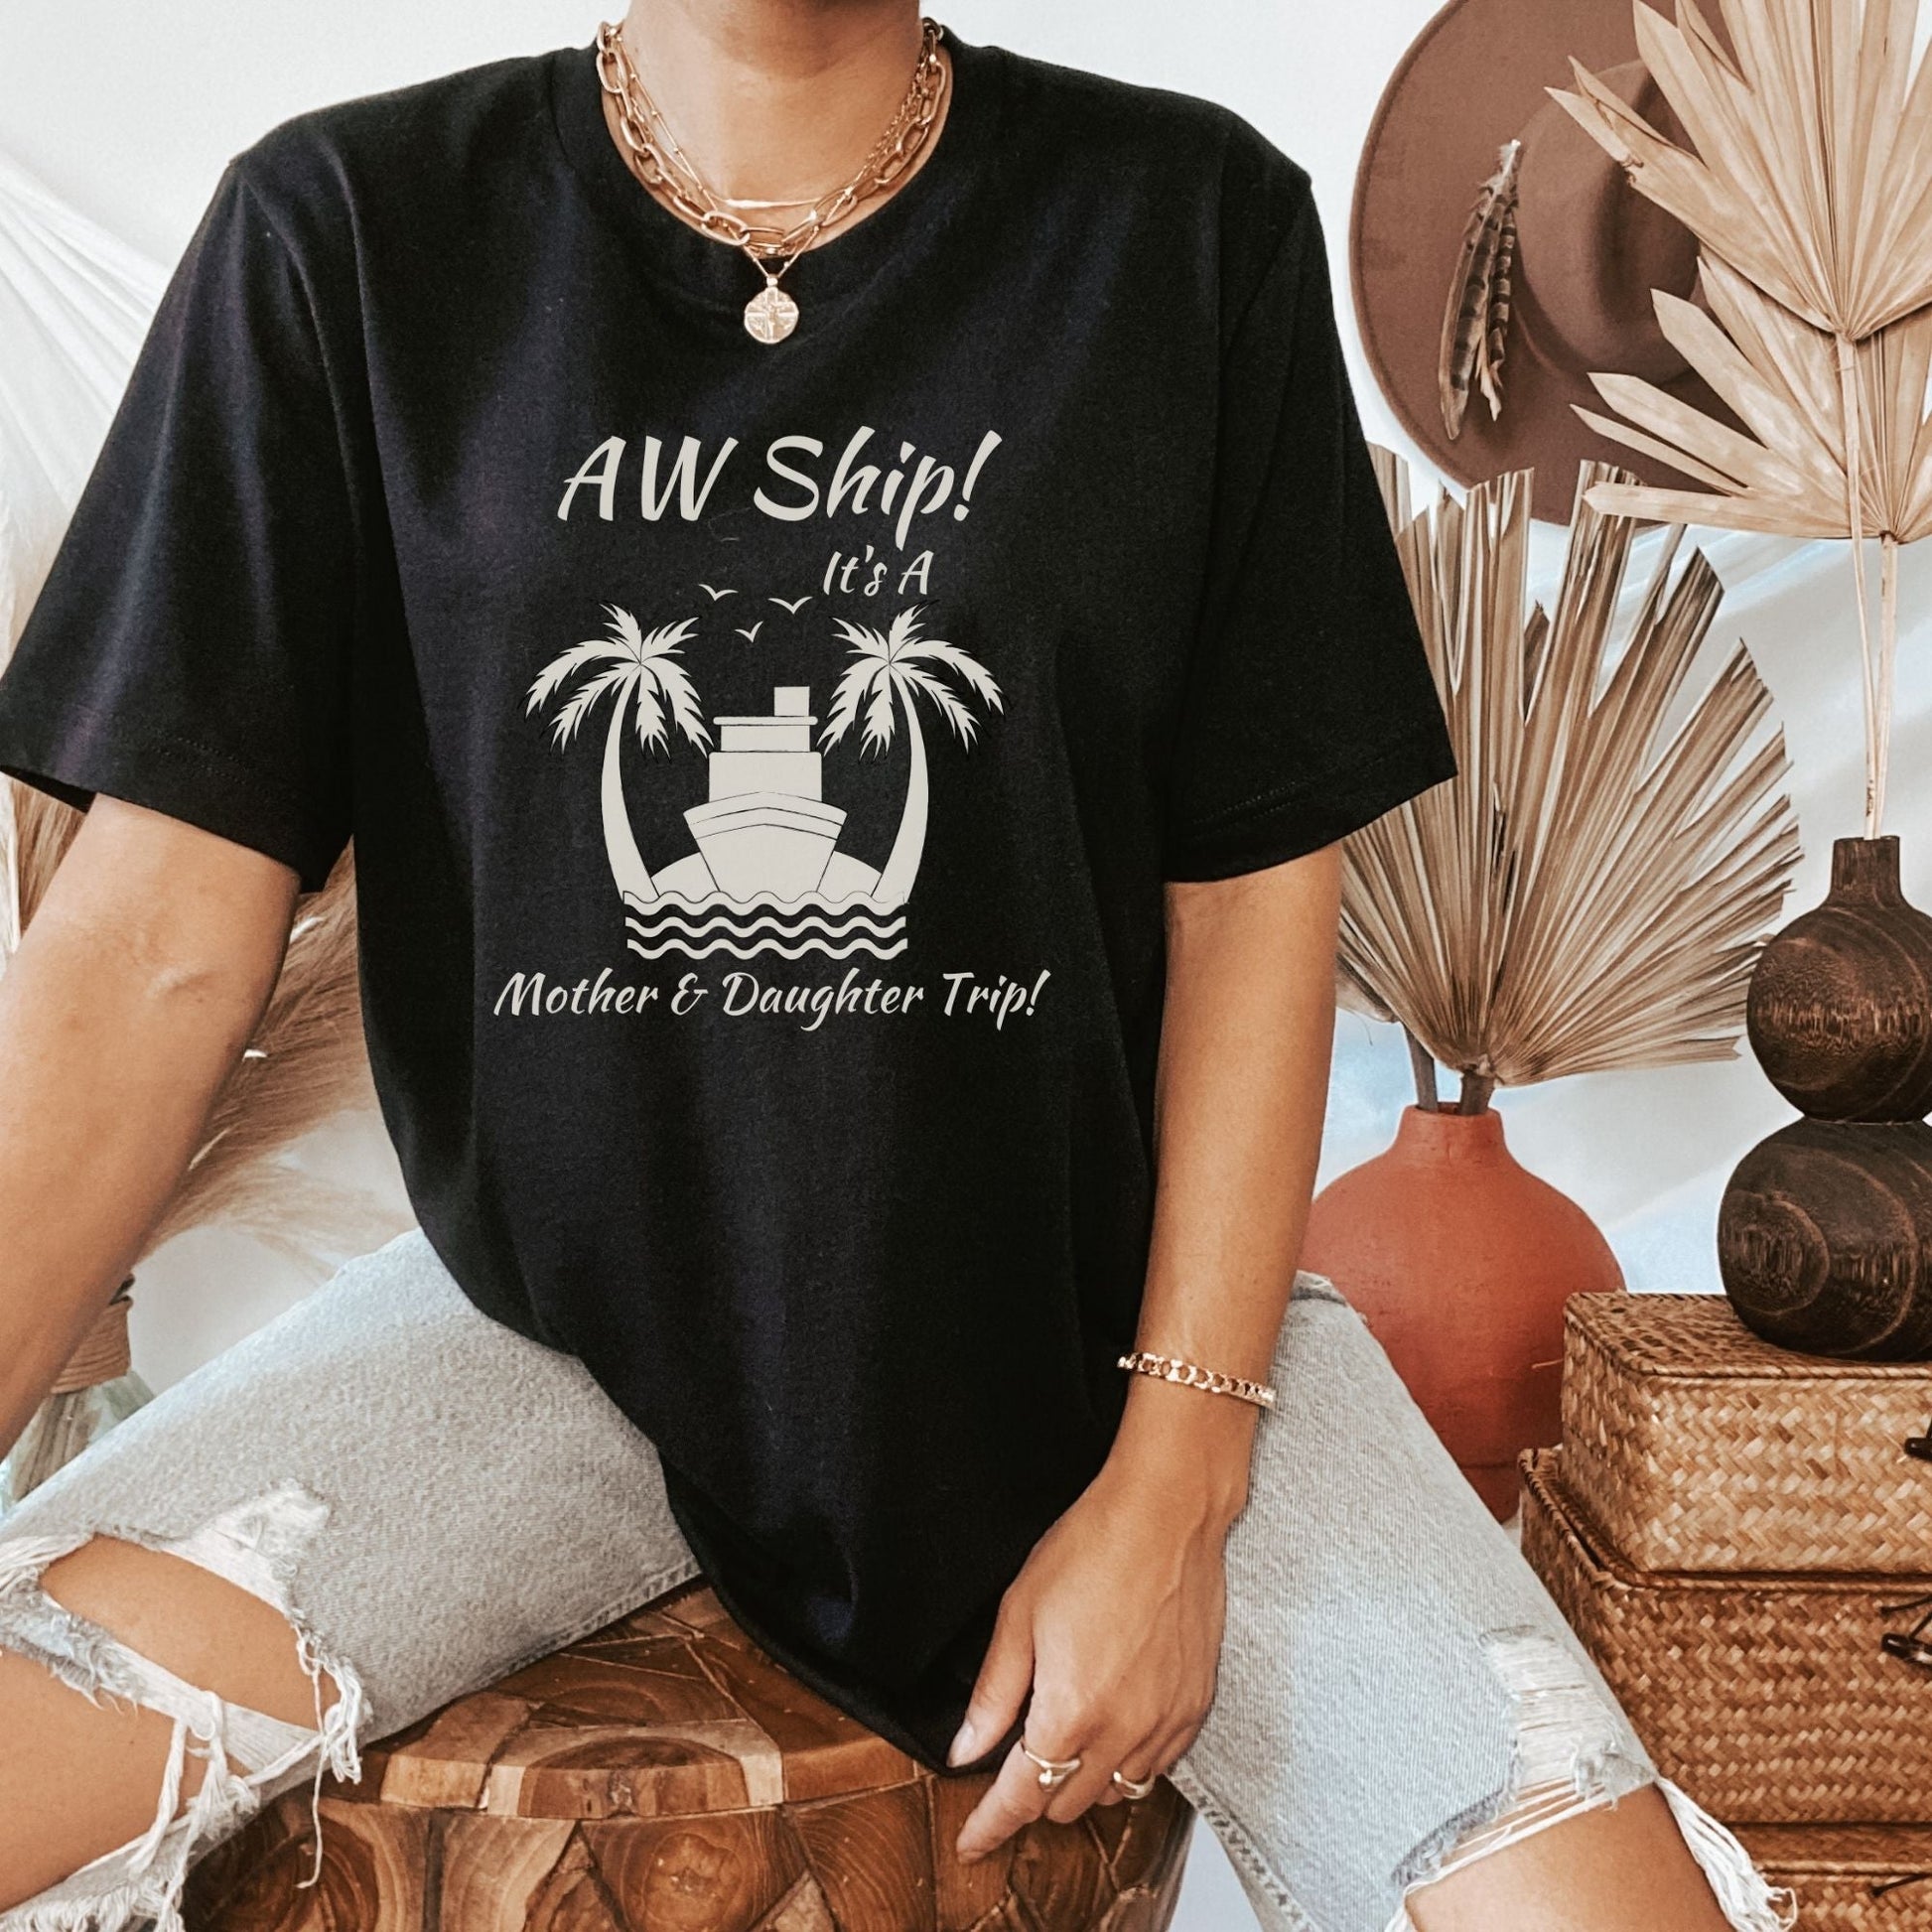 Aw Ship! It's a Mother Daughter Trip Cruise Shirt